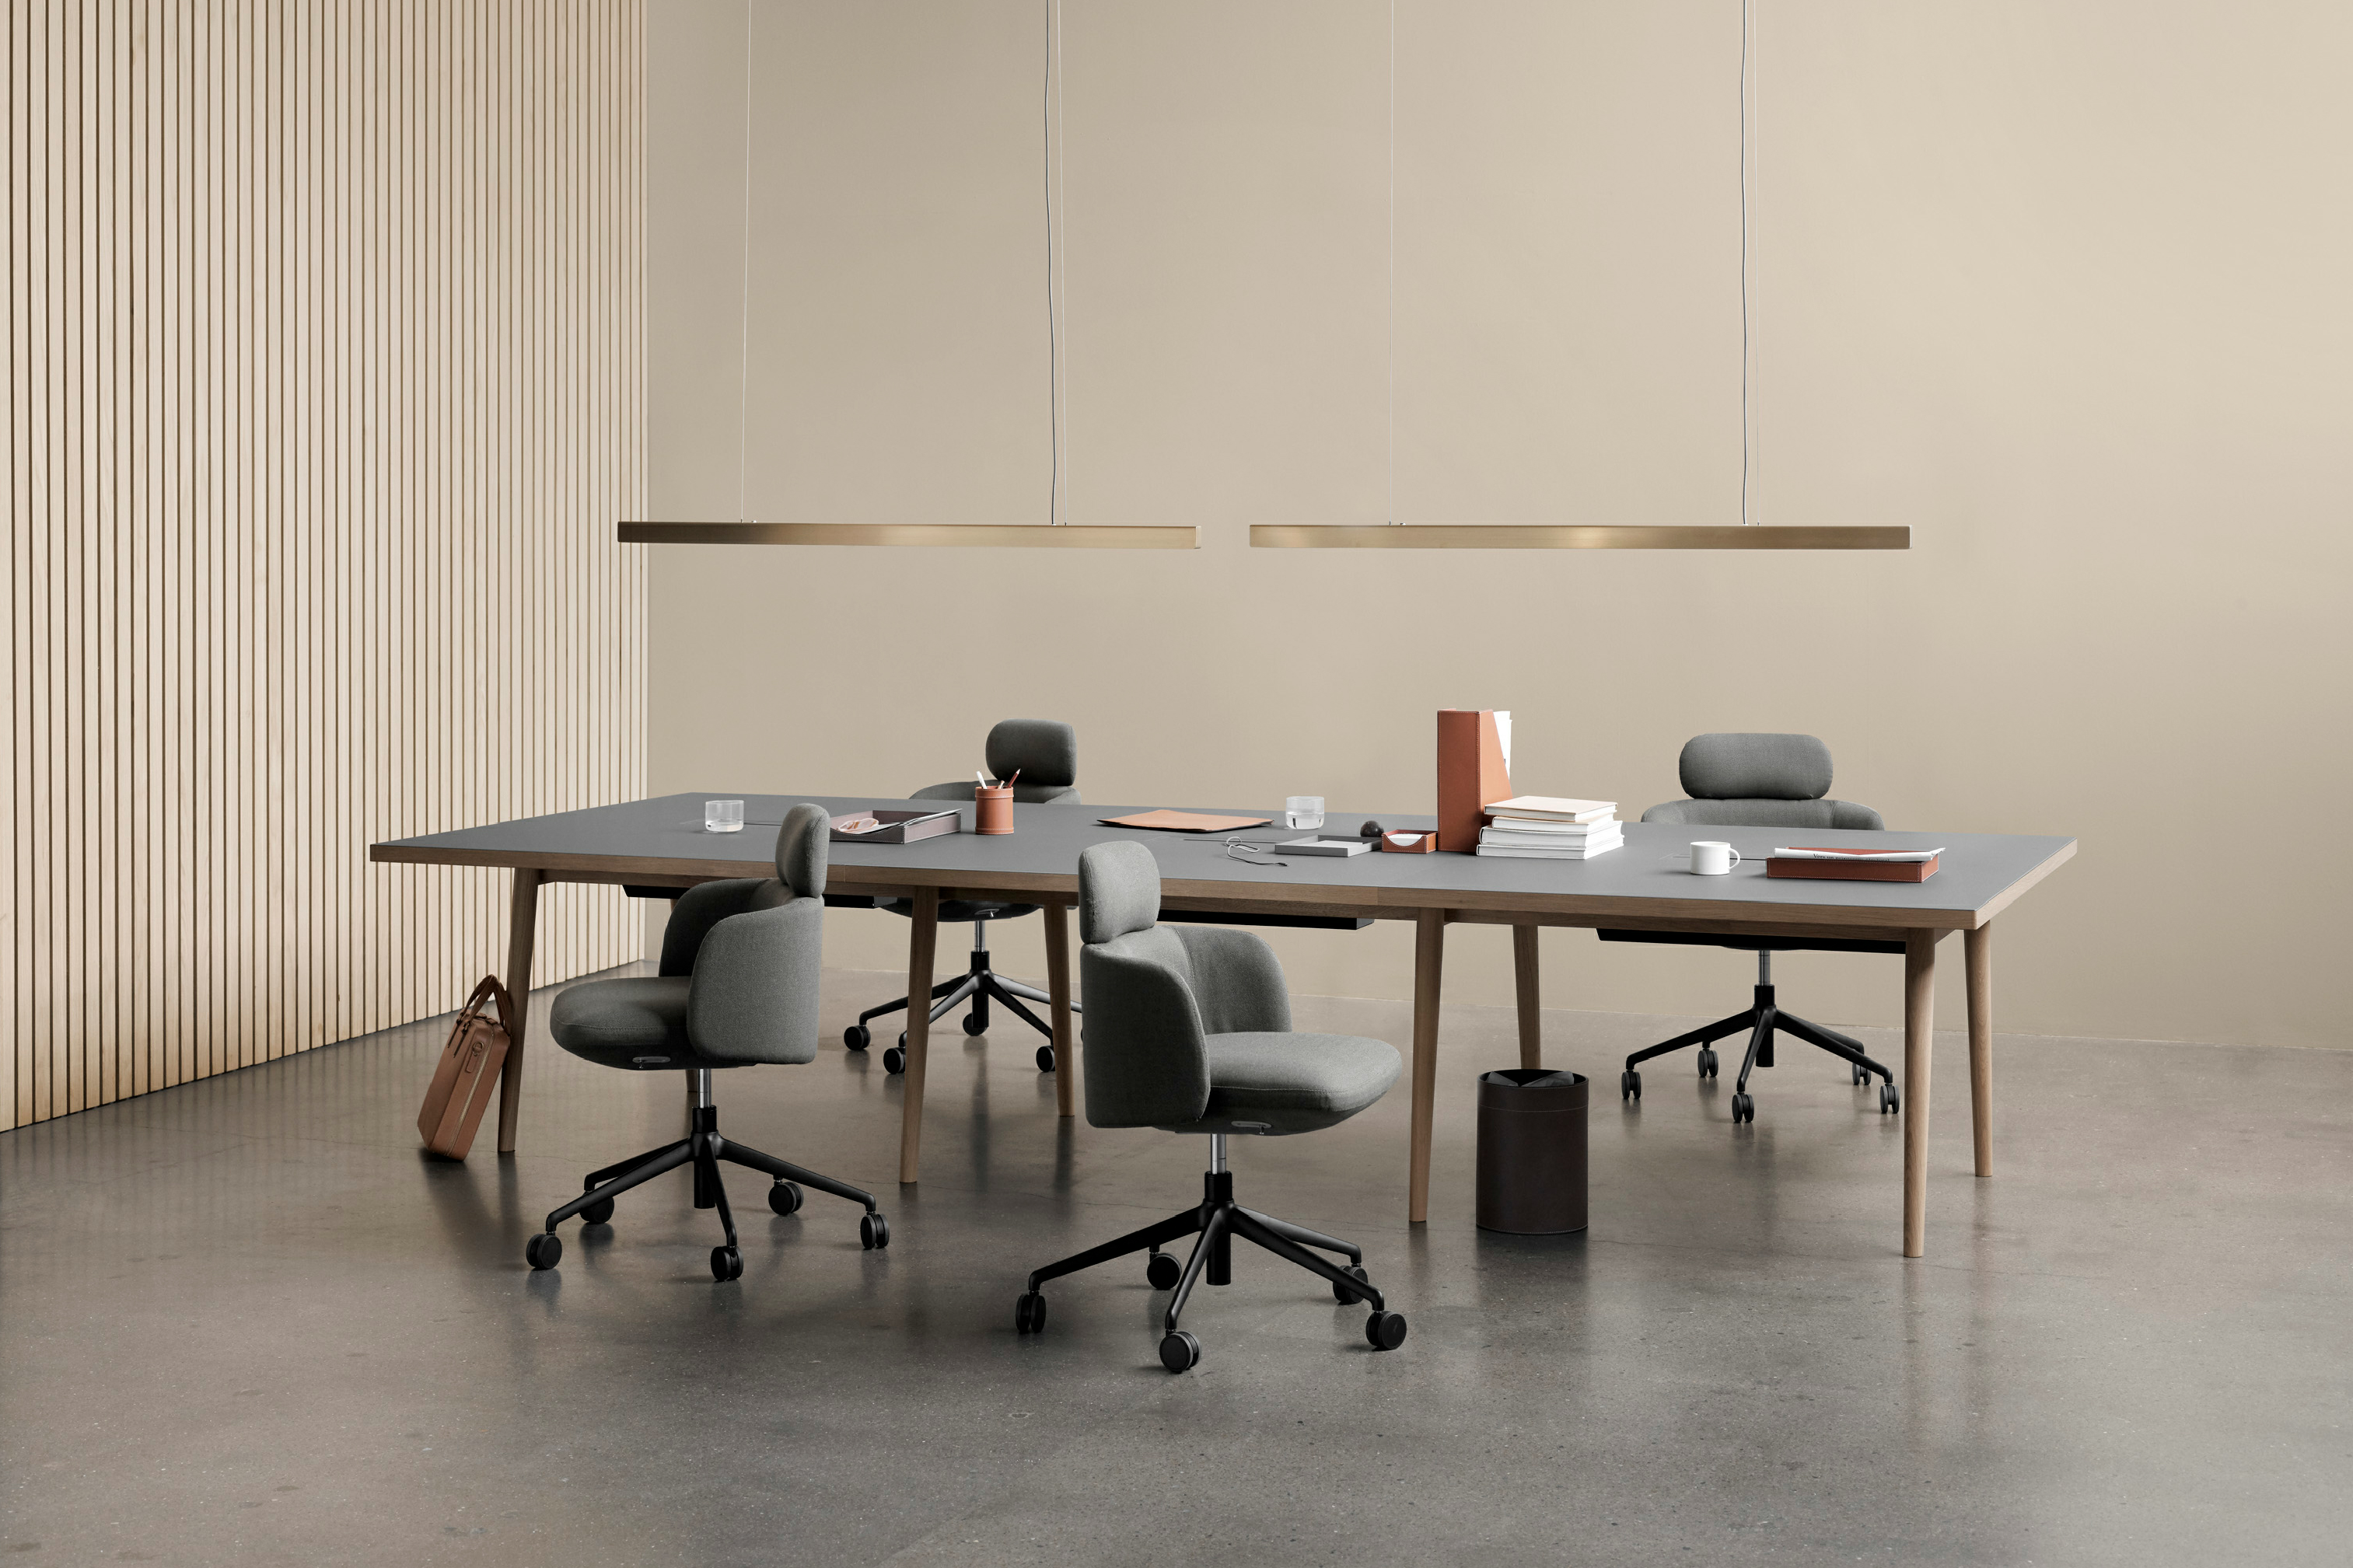 The Forum Table series comes in a variety of table top sizes and colours for the frame and edge.